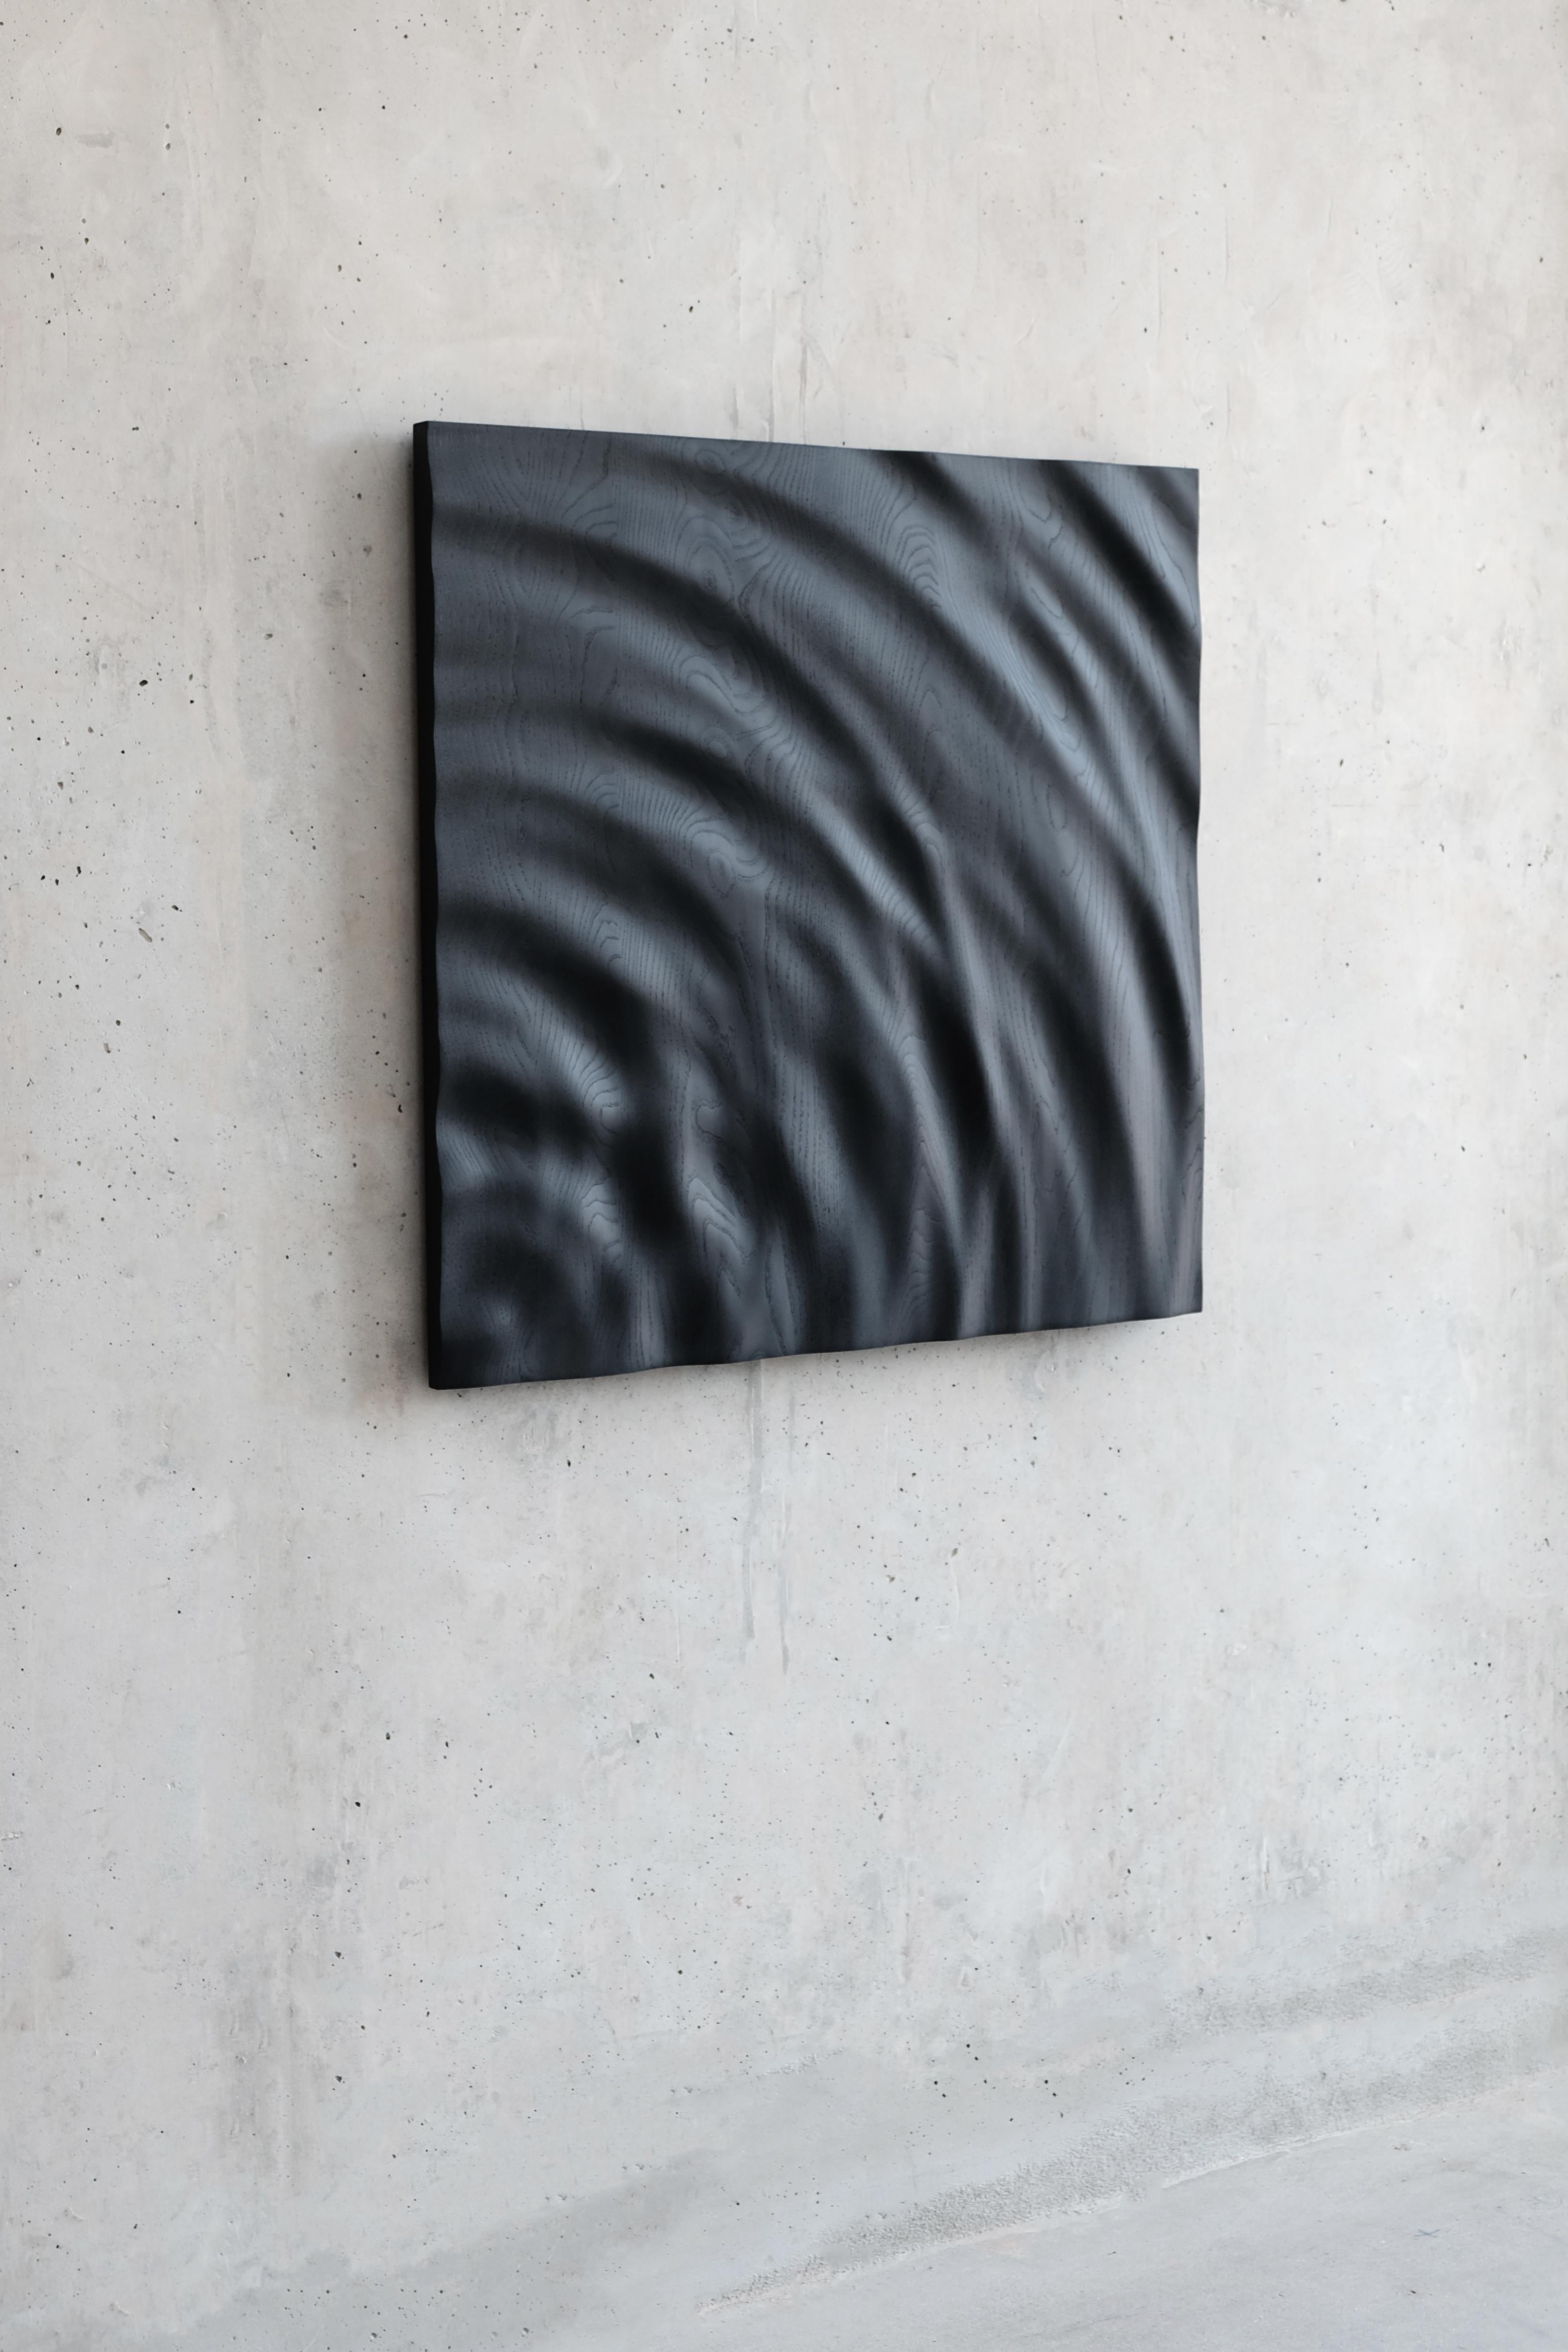 Unseen and unknown by each other, distant forces impact upon the same surface. Each affect ripples outwards, simultaneously amplifying and erasing the other.

Suspended animation.

- 

Solid hardwood carving, wall mounted. Designed and made in